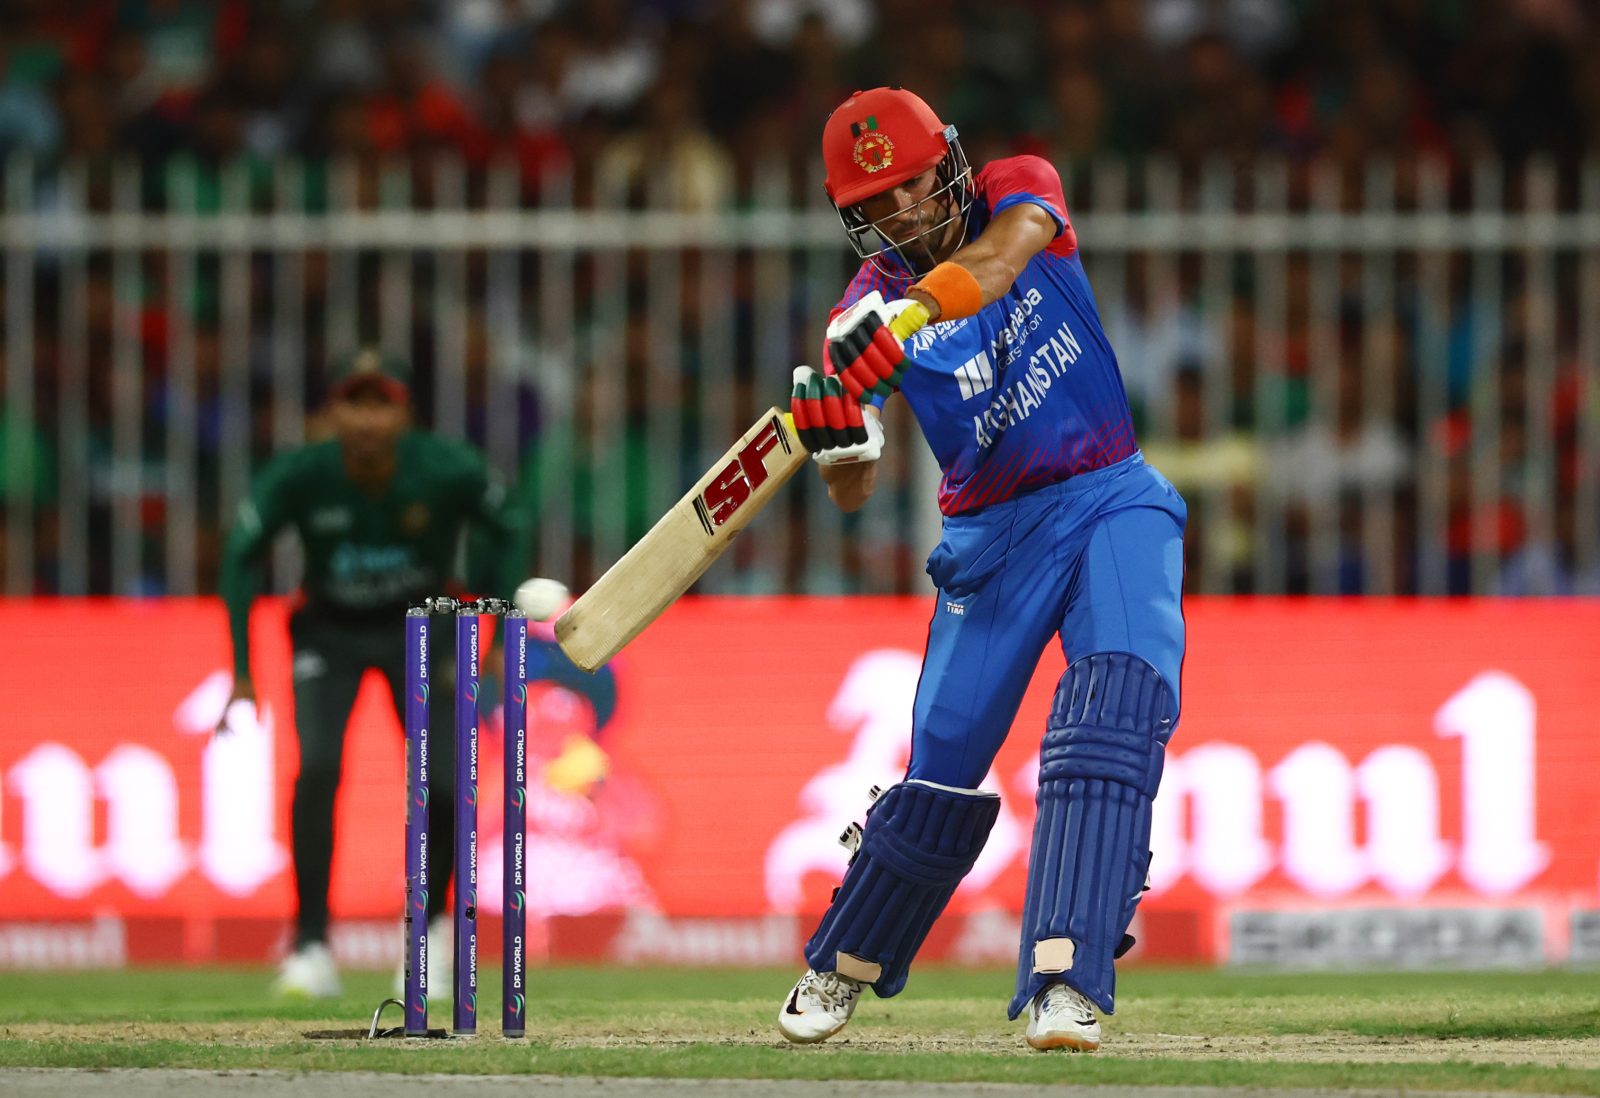 Afghanistan are in the top four